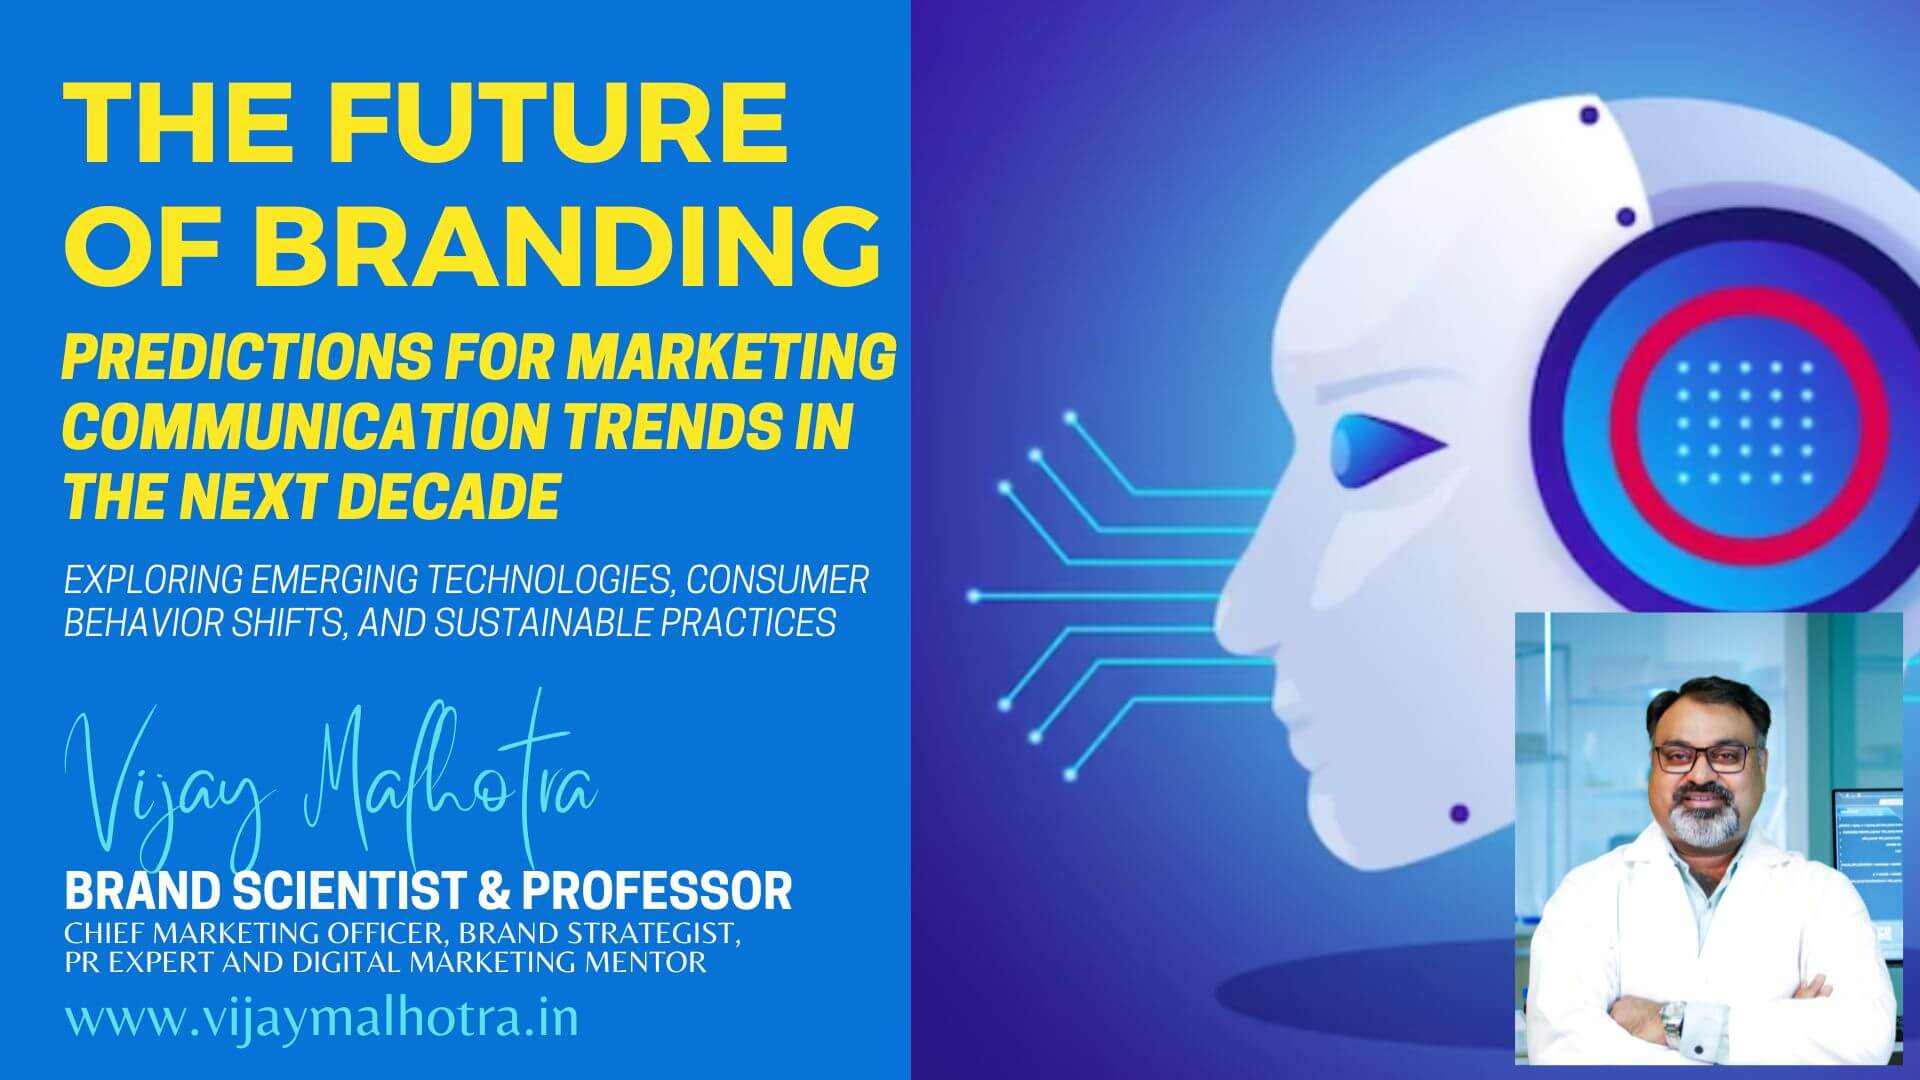 The Future of Branding Predictions for Marketing Communication Trends in the Next Decade